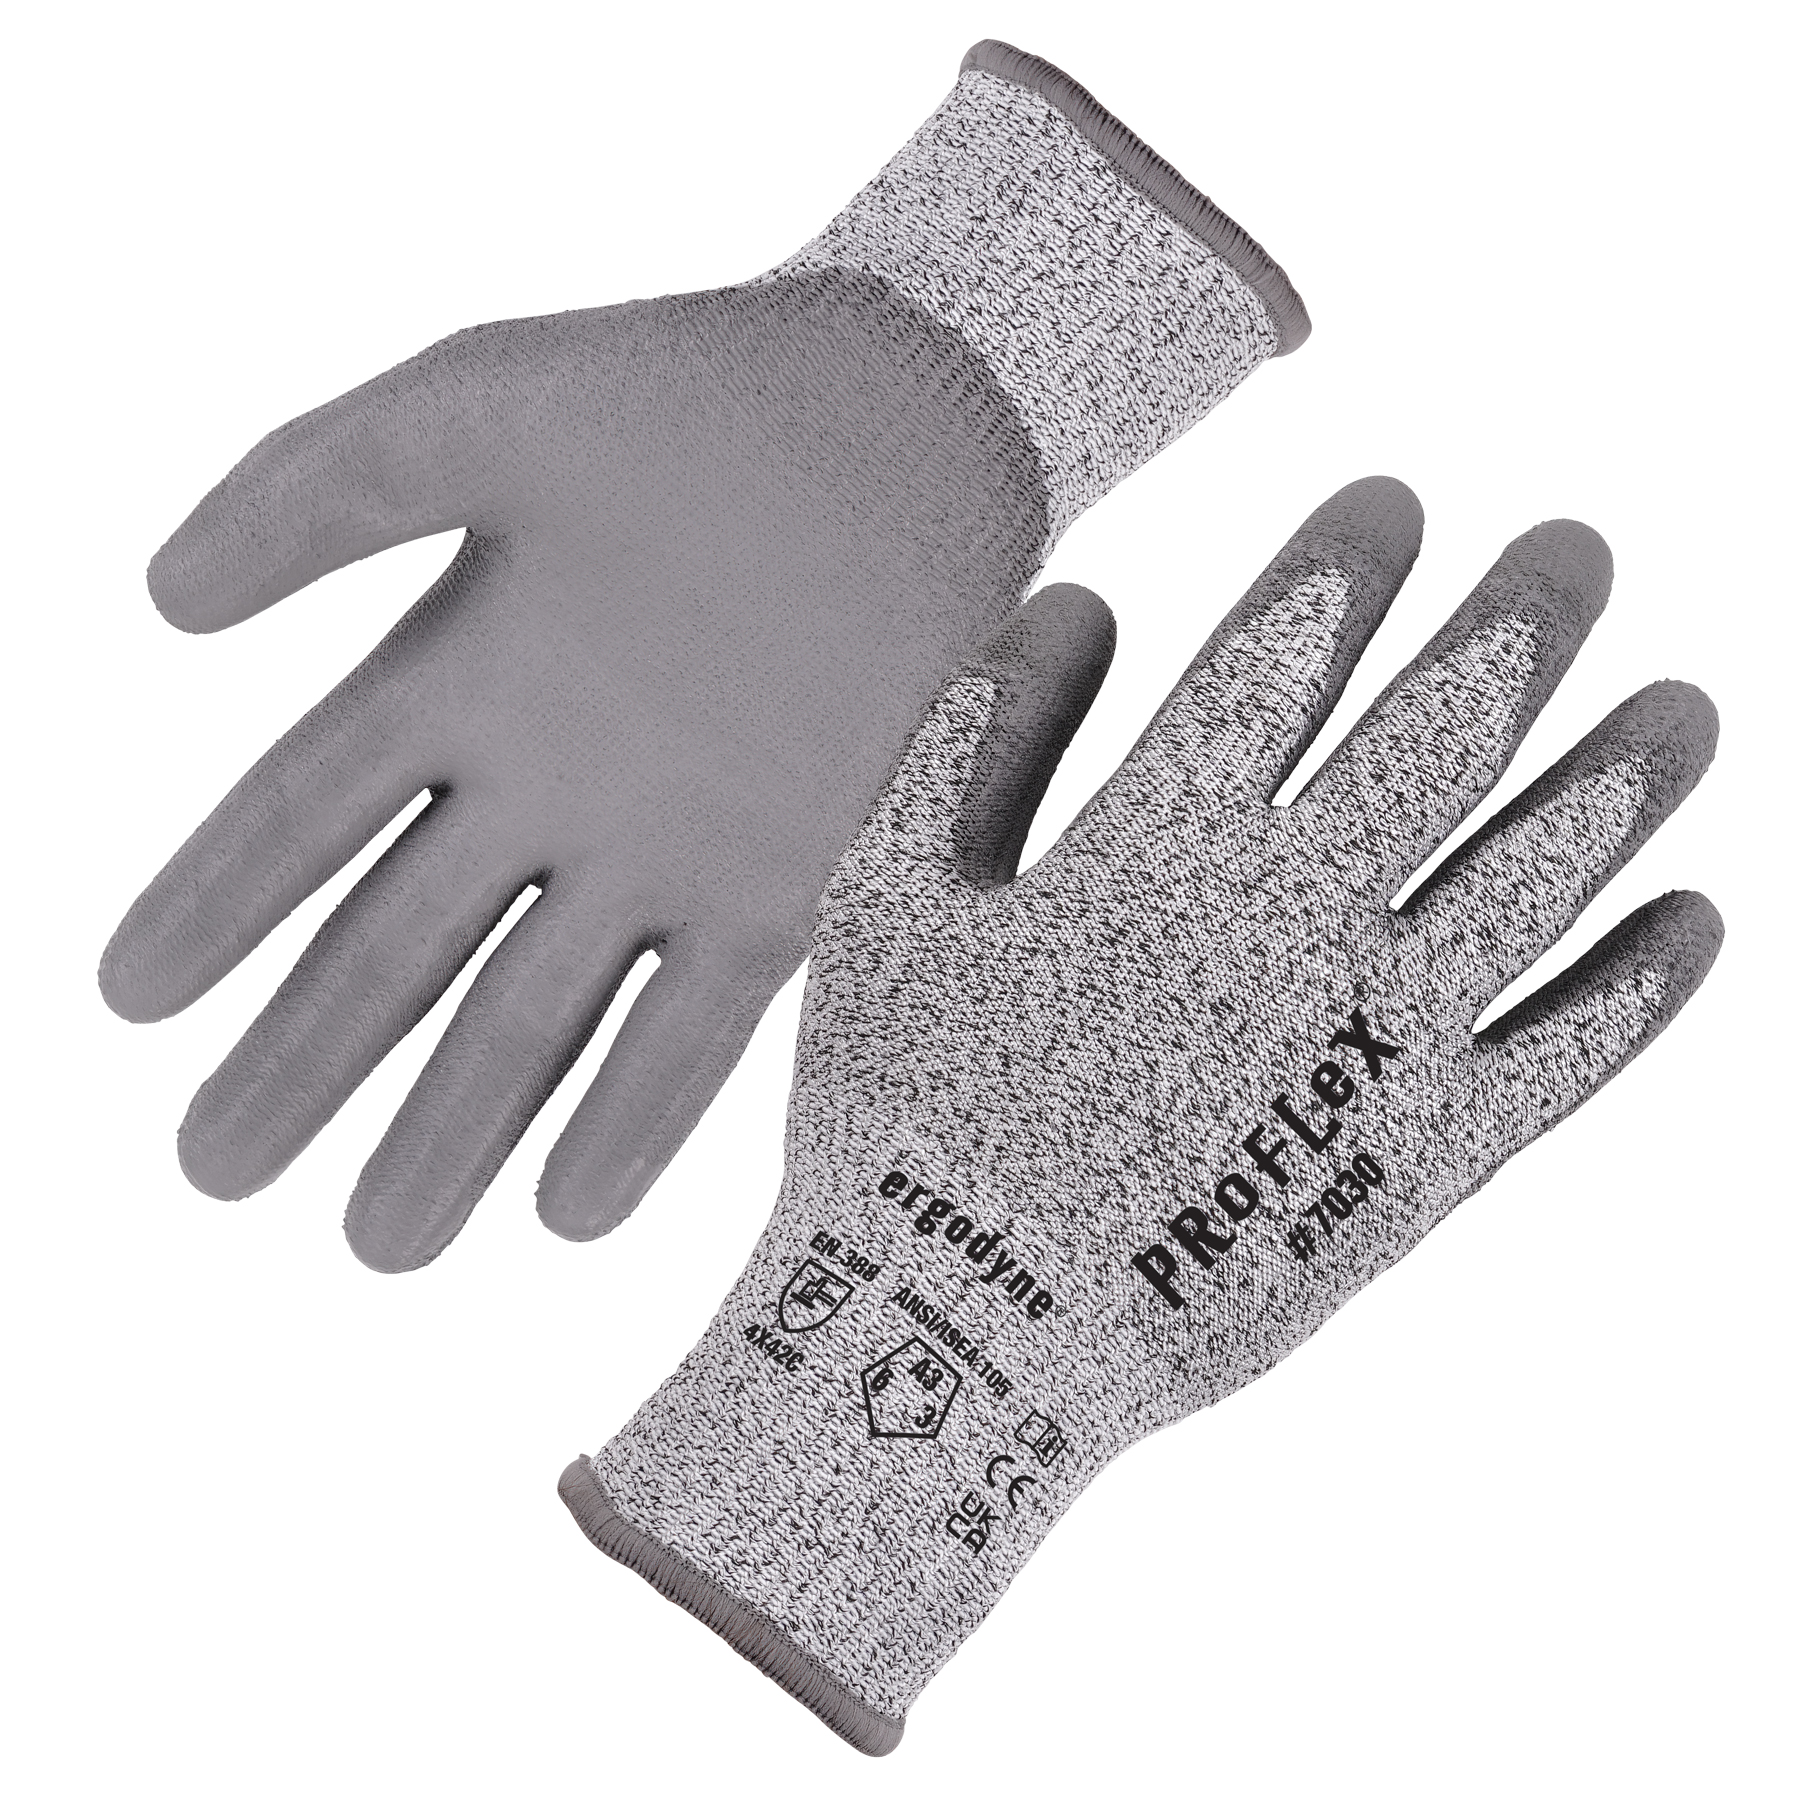 https://www.ergodyne.com/sites/default/files/product-images/10462-7030-ansi-a3-pu-coated-cr-gloves-grey-pair_1.jpg